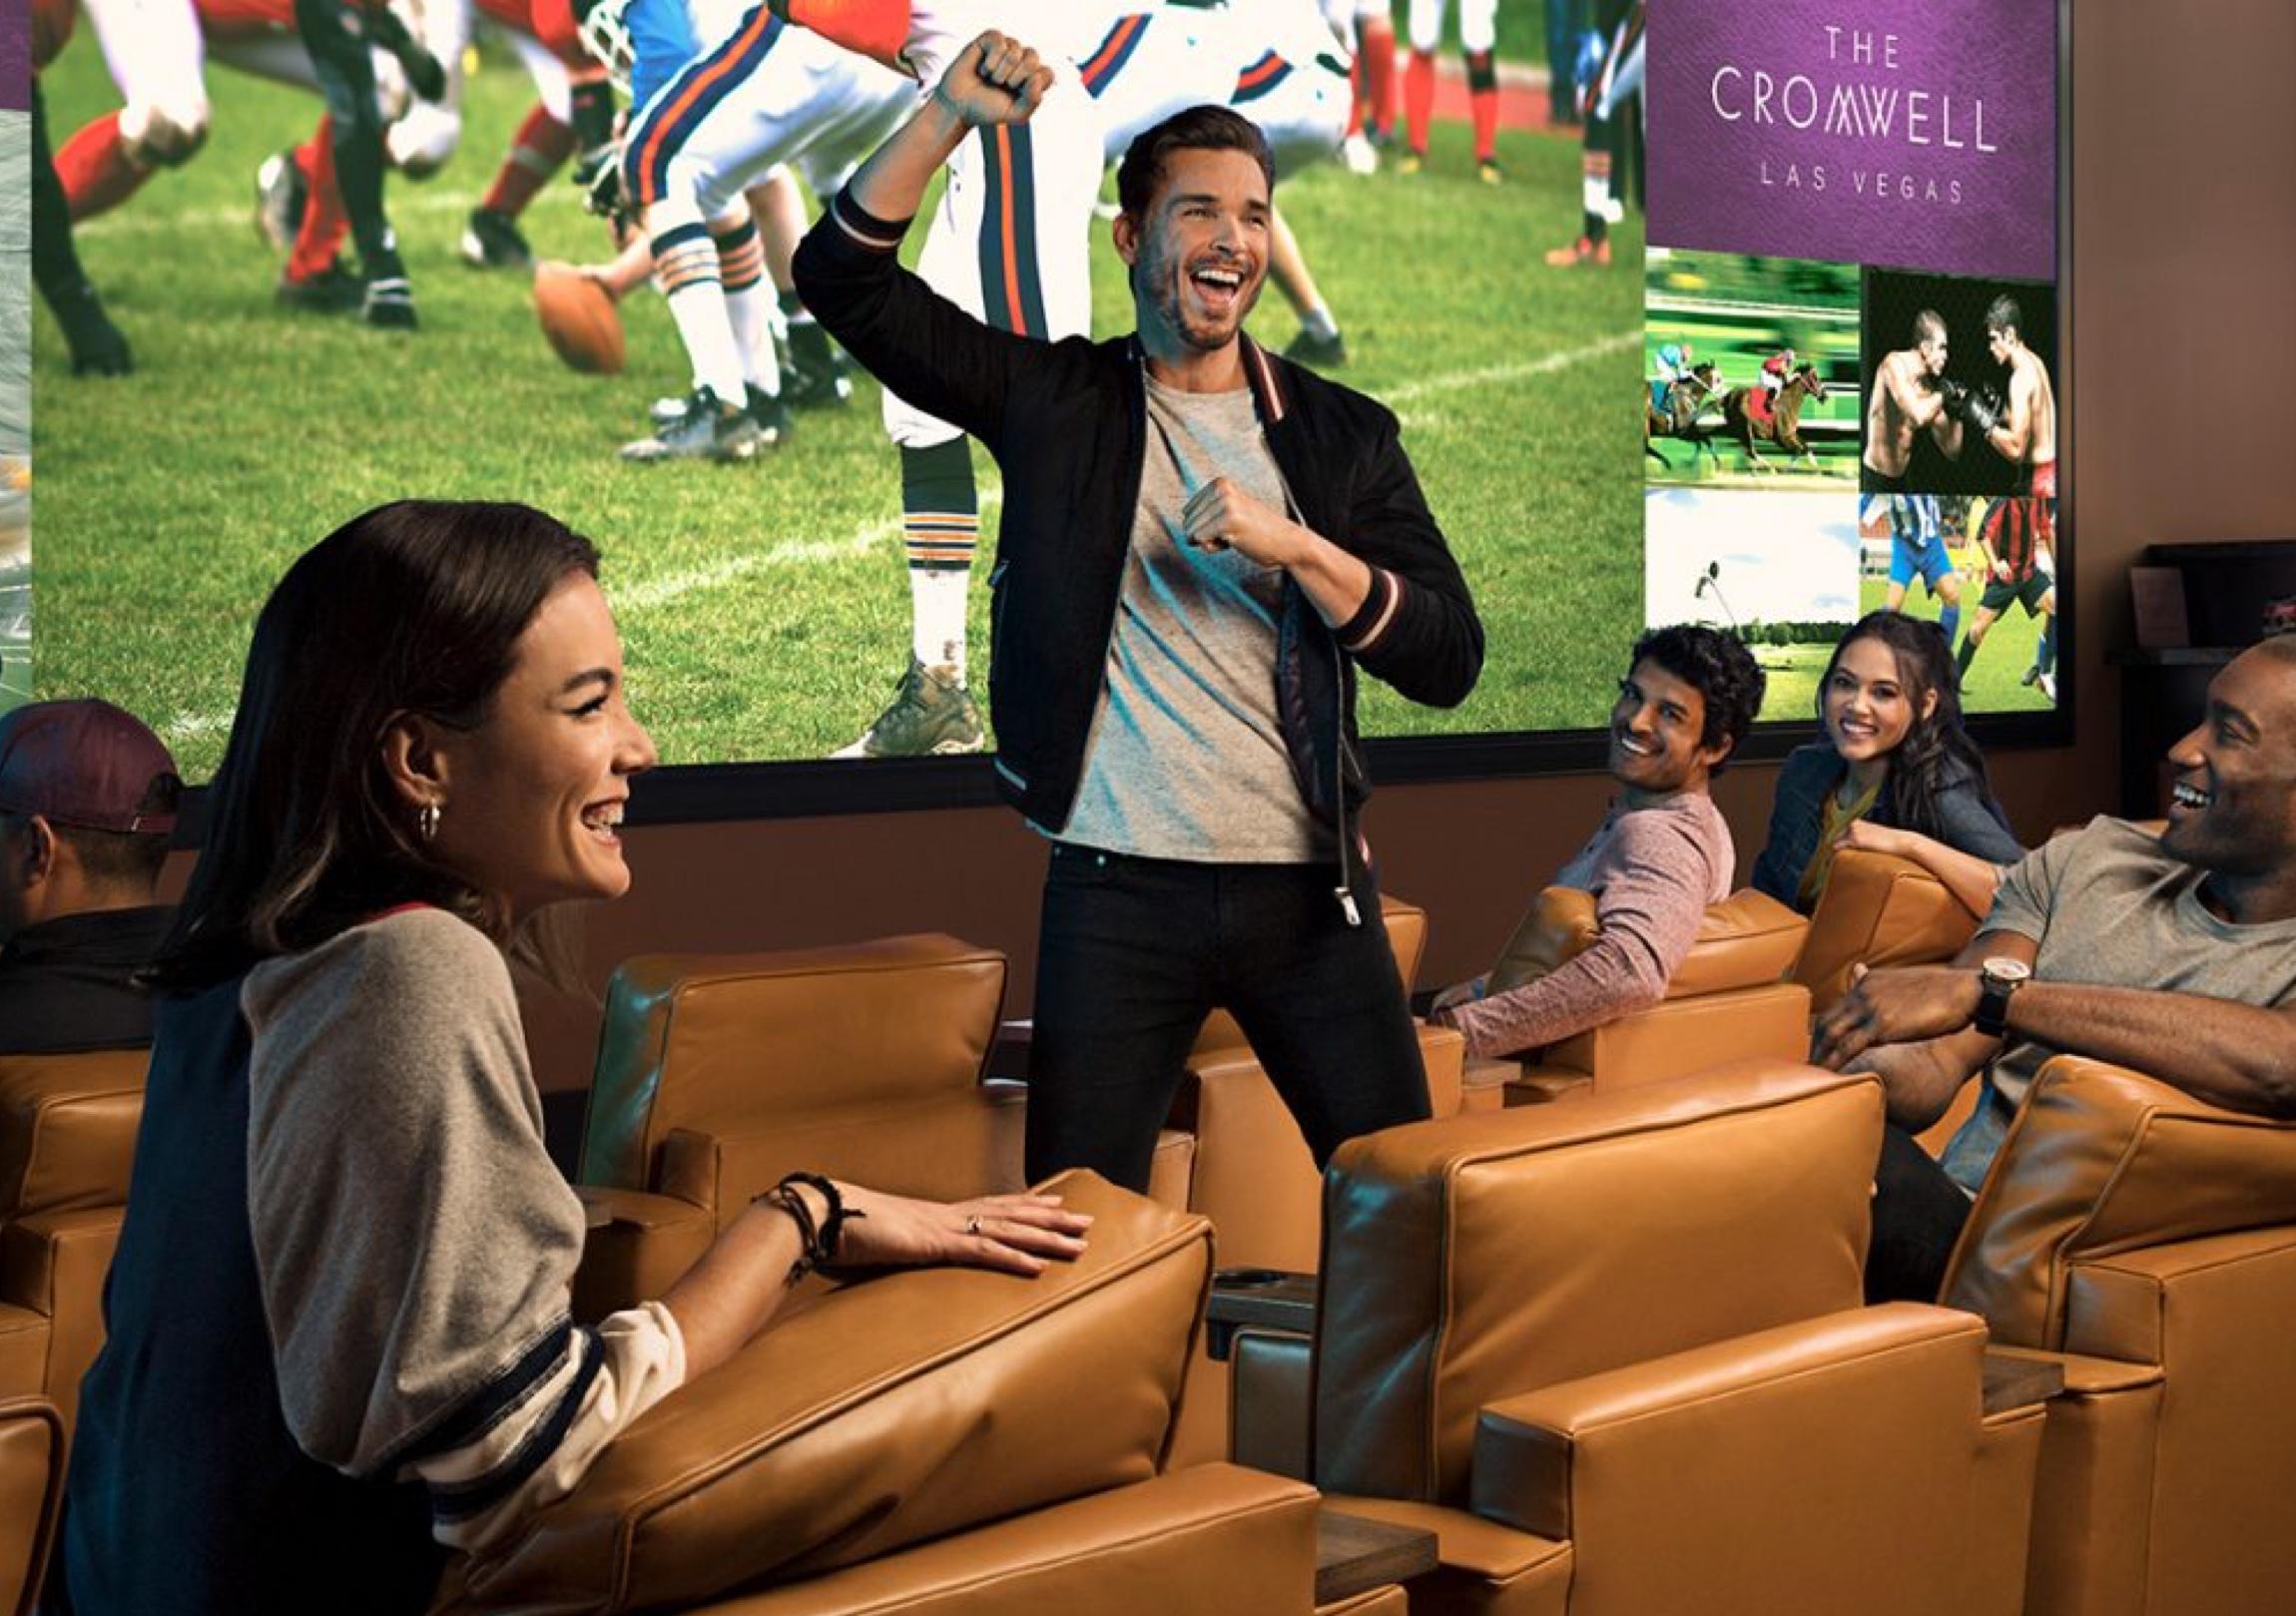 Friends enjoying a football game in a private viewing room